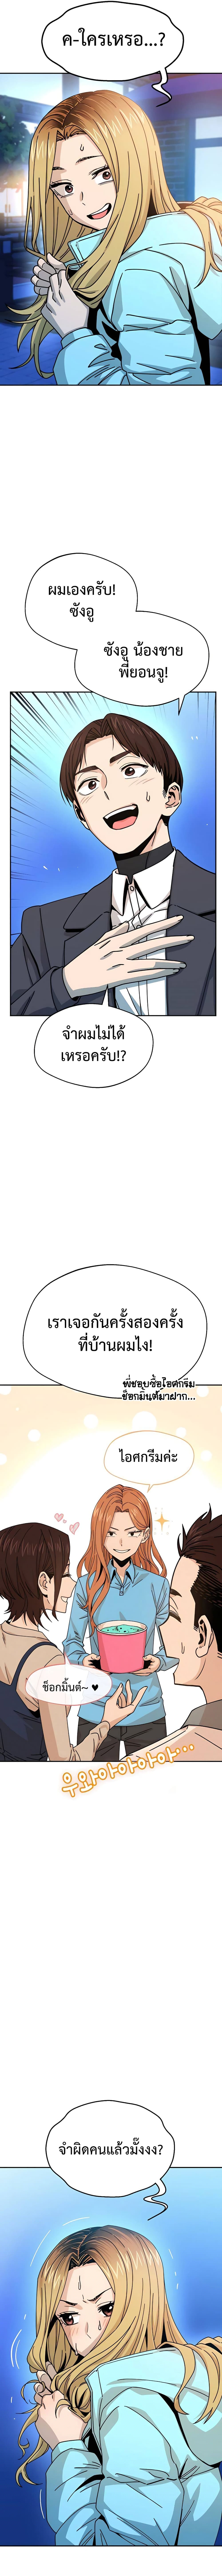 Match Made in Heaven by chance ตอนที่ 18 (2)